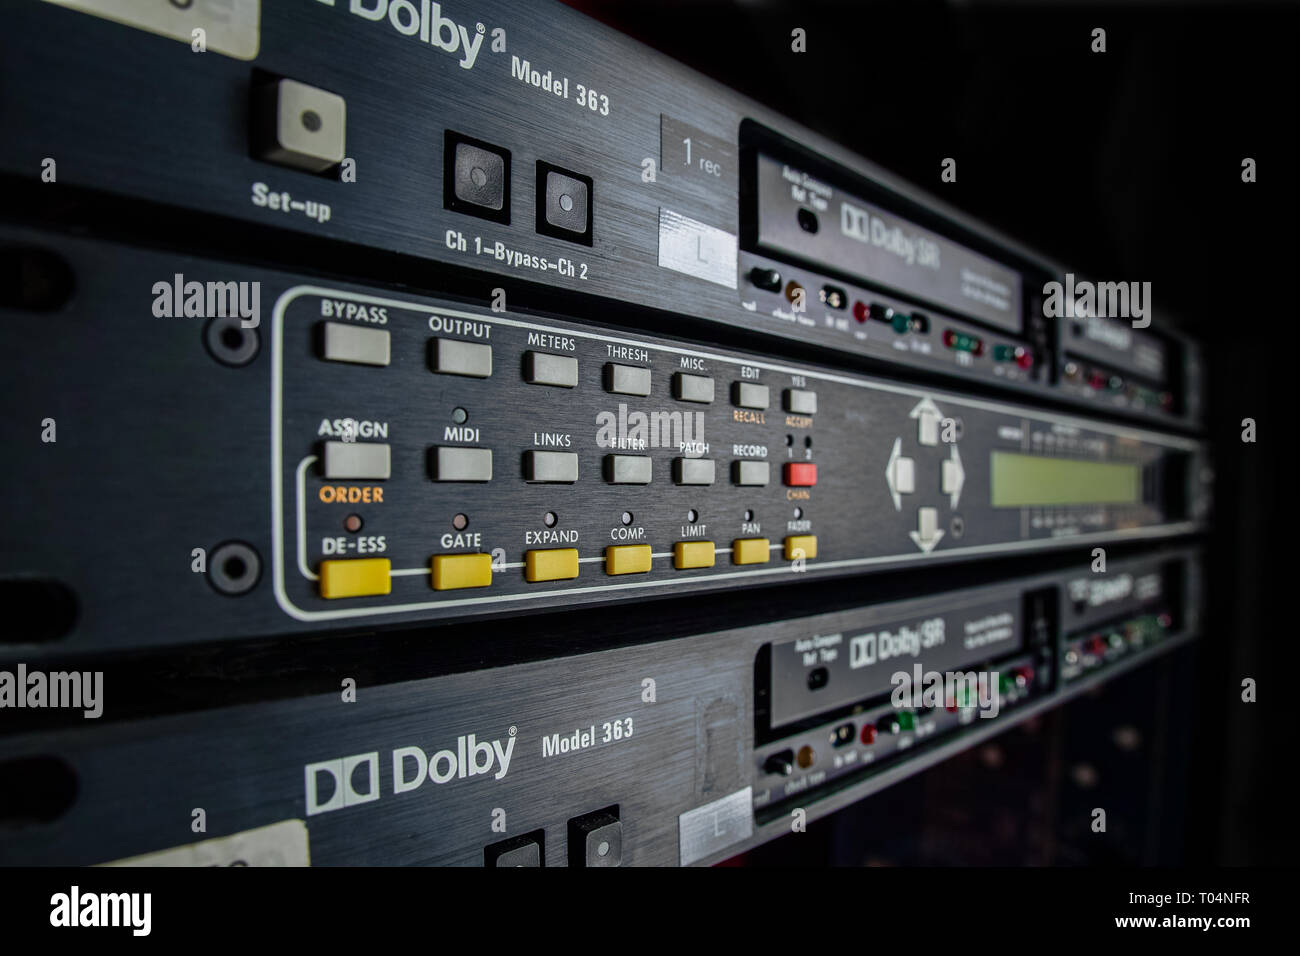 2 Dolby SR units and in between, sandwiched, the Drawmer M500 dynamic processor. Viewed in perspective, low key. Copy space. Stock Photo